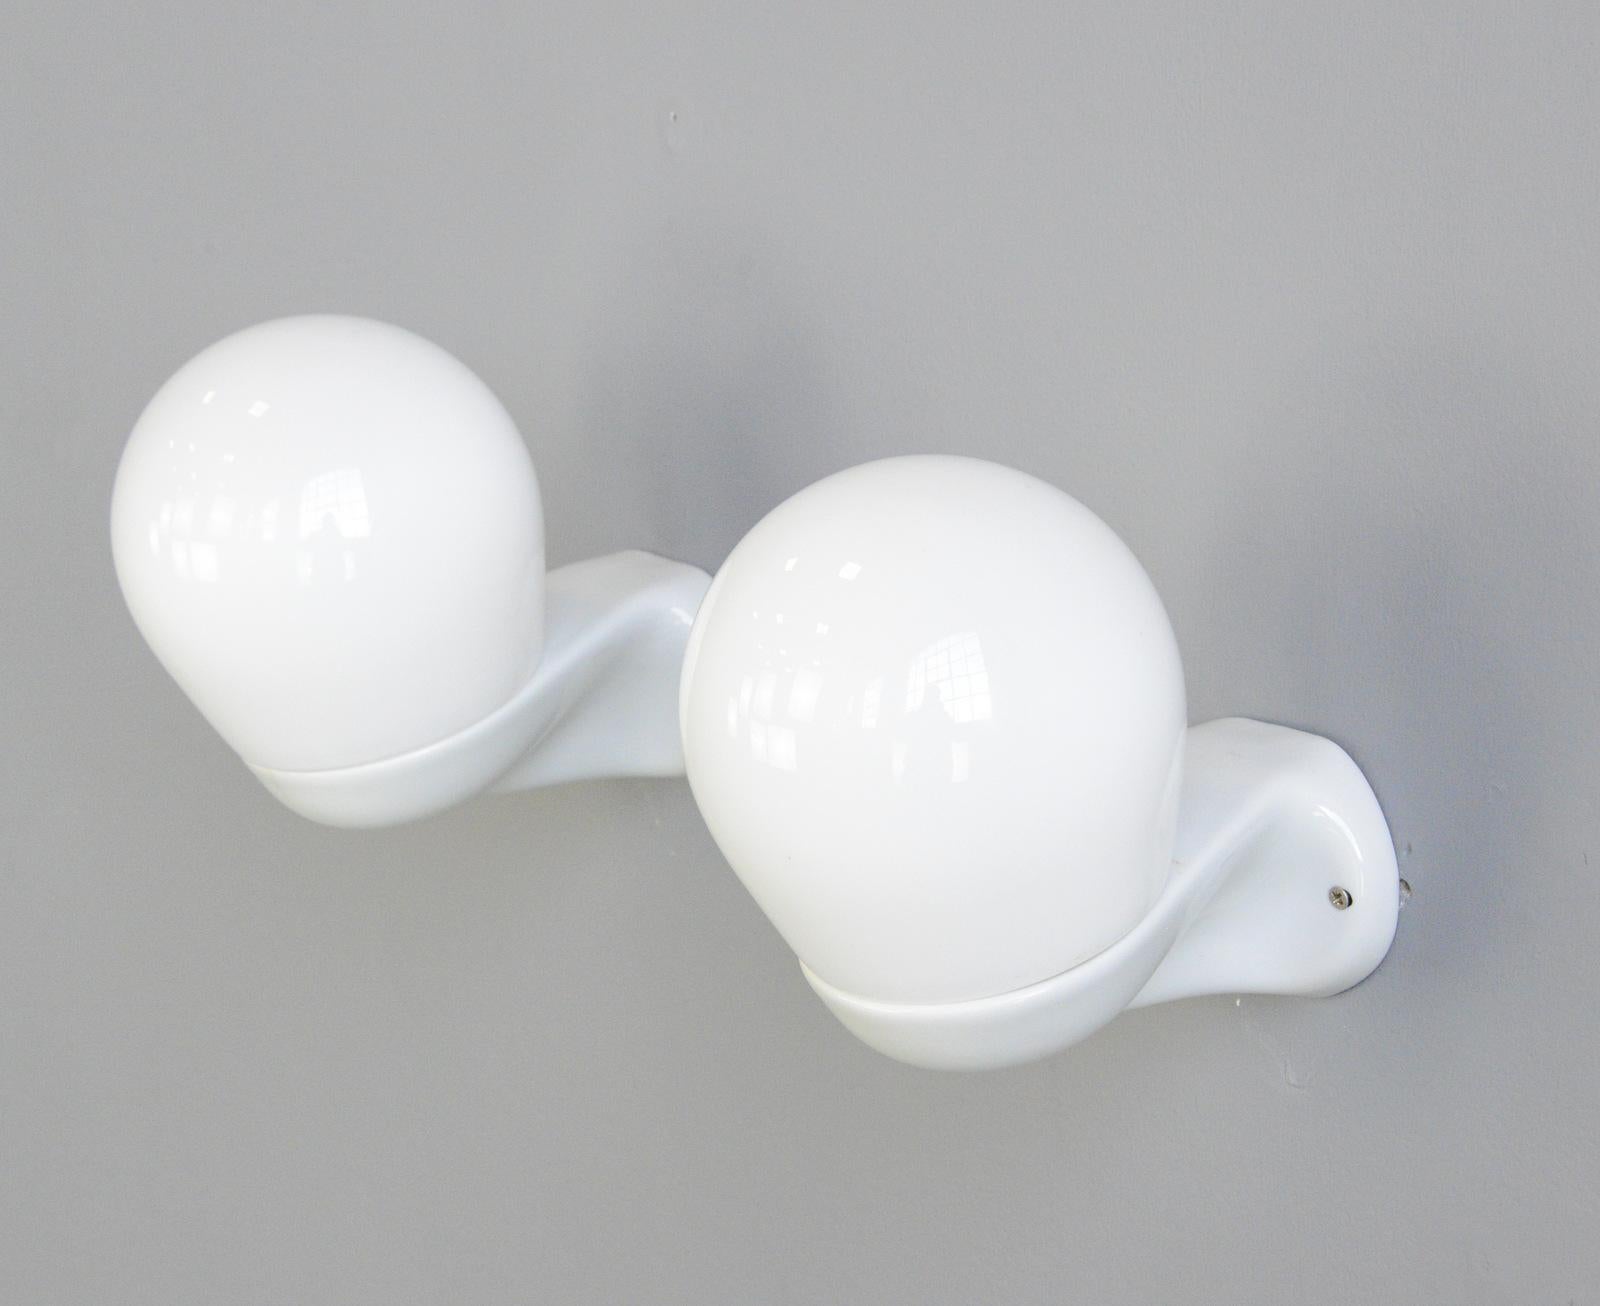 Mid-20th Century Porcelain Bathroom Lights by Wagenfeld for Lindner, circa 1950s